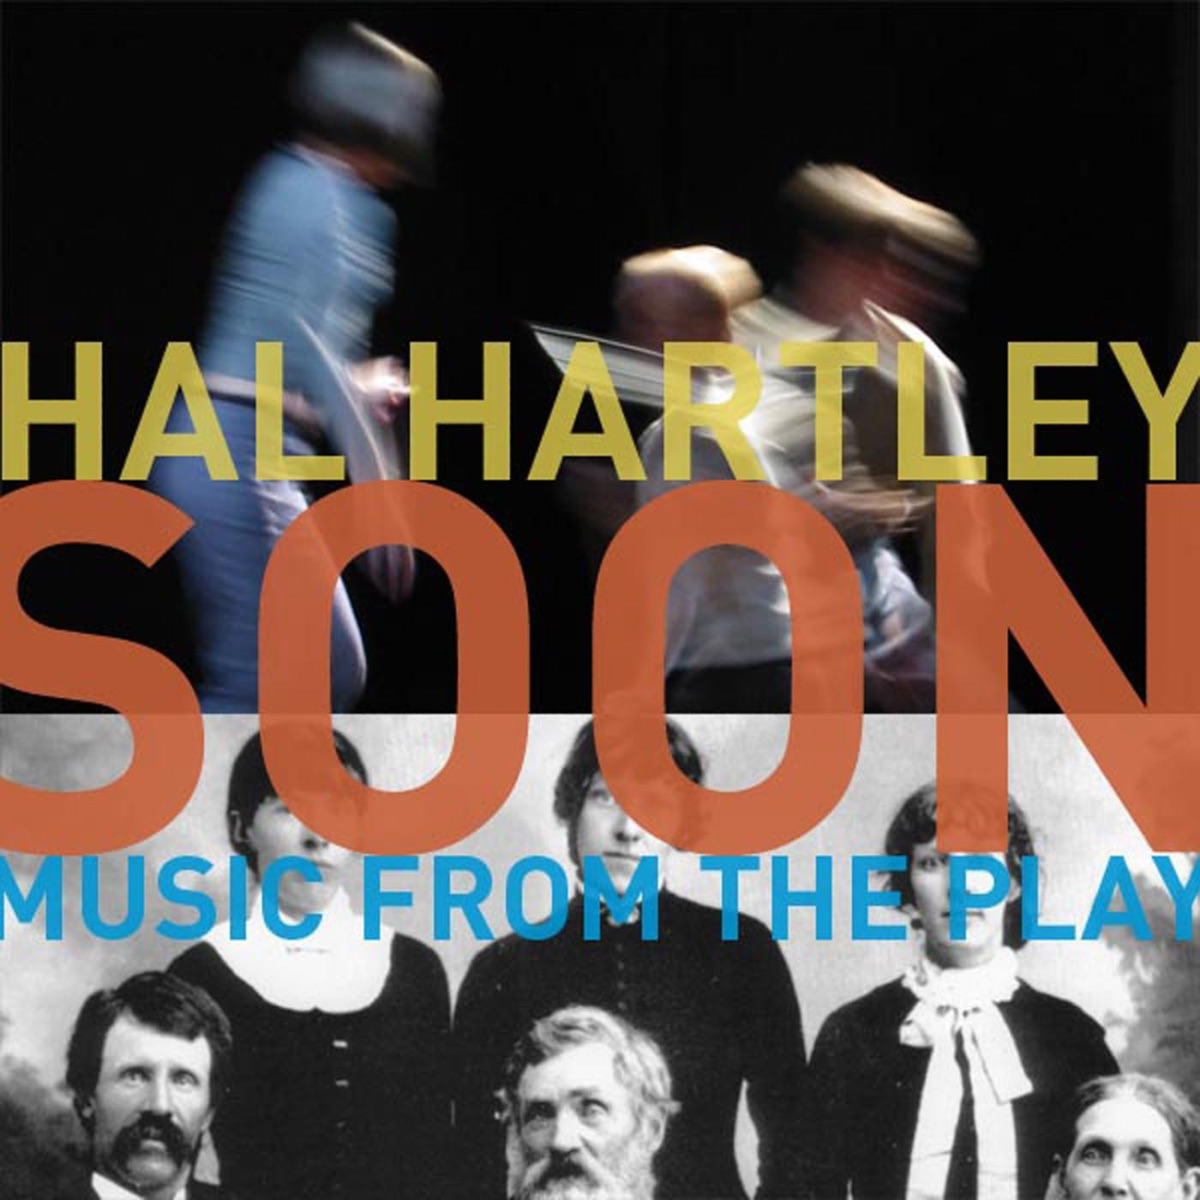 Possible Music 1 From the Films (Etc) of Hal Hartley - Album by Hal Hartley 